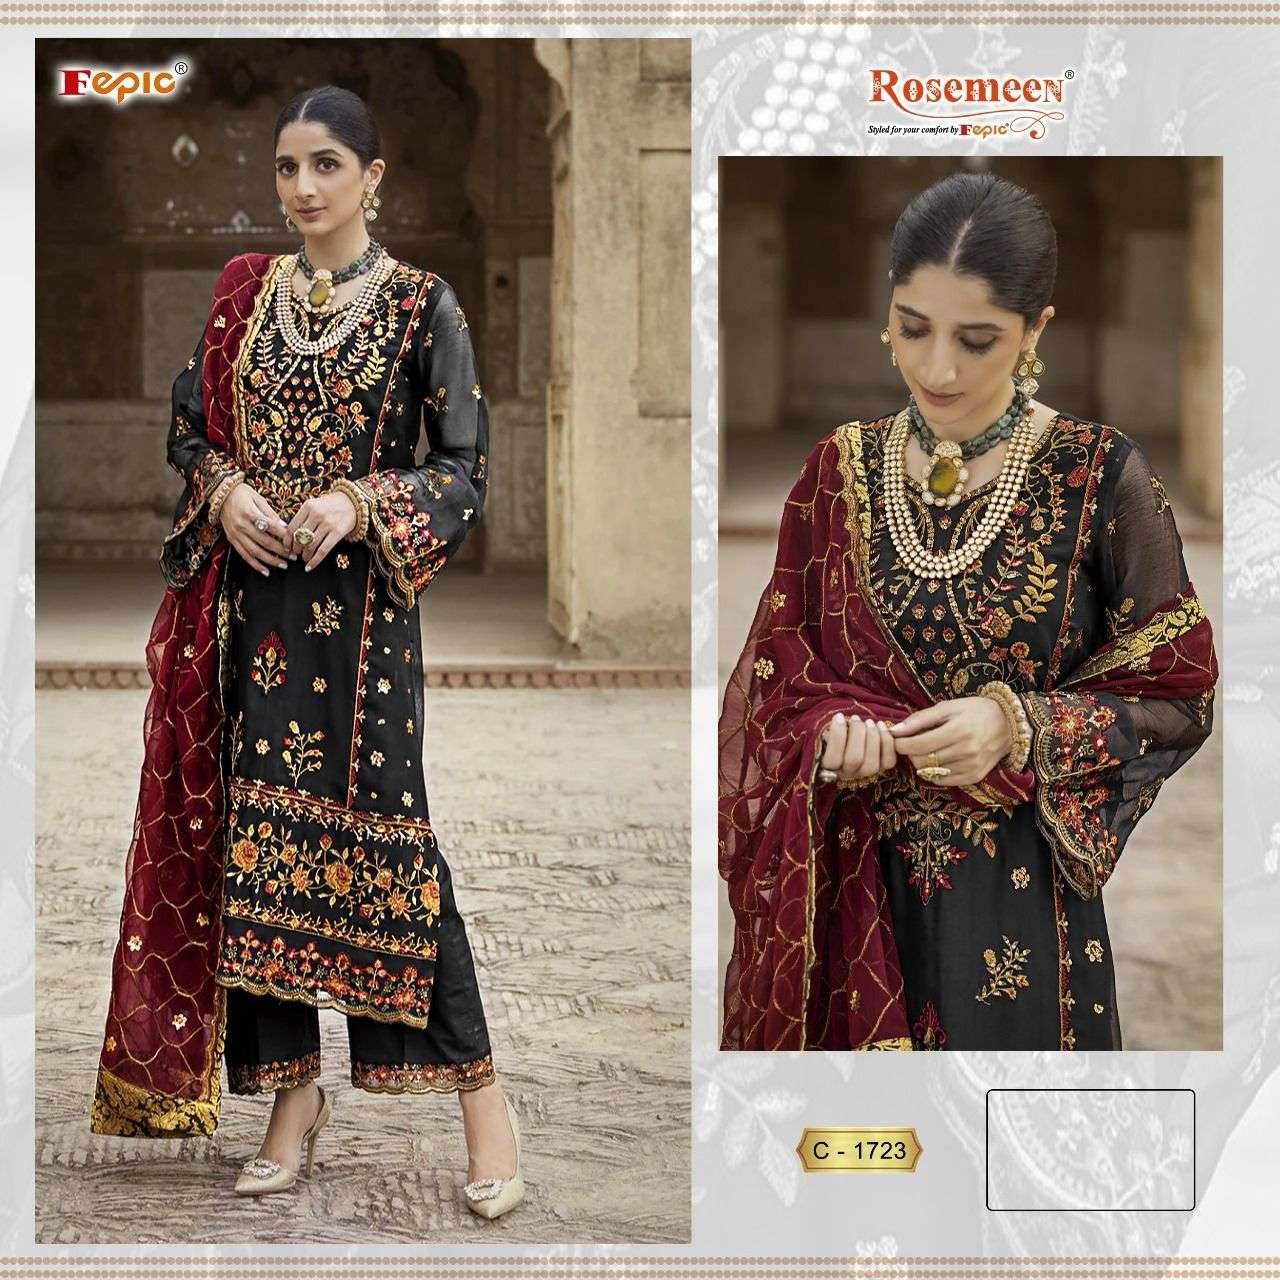 ROSEMEEN C-1723 BY FEPIC DESIGNER ORGANZA EMBROIDERY PAKISTANI DRESS